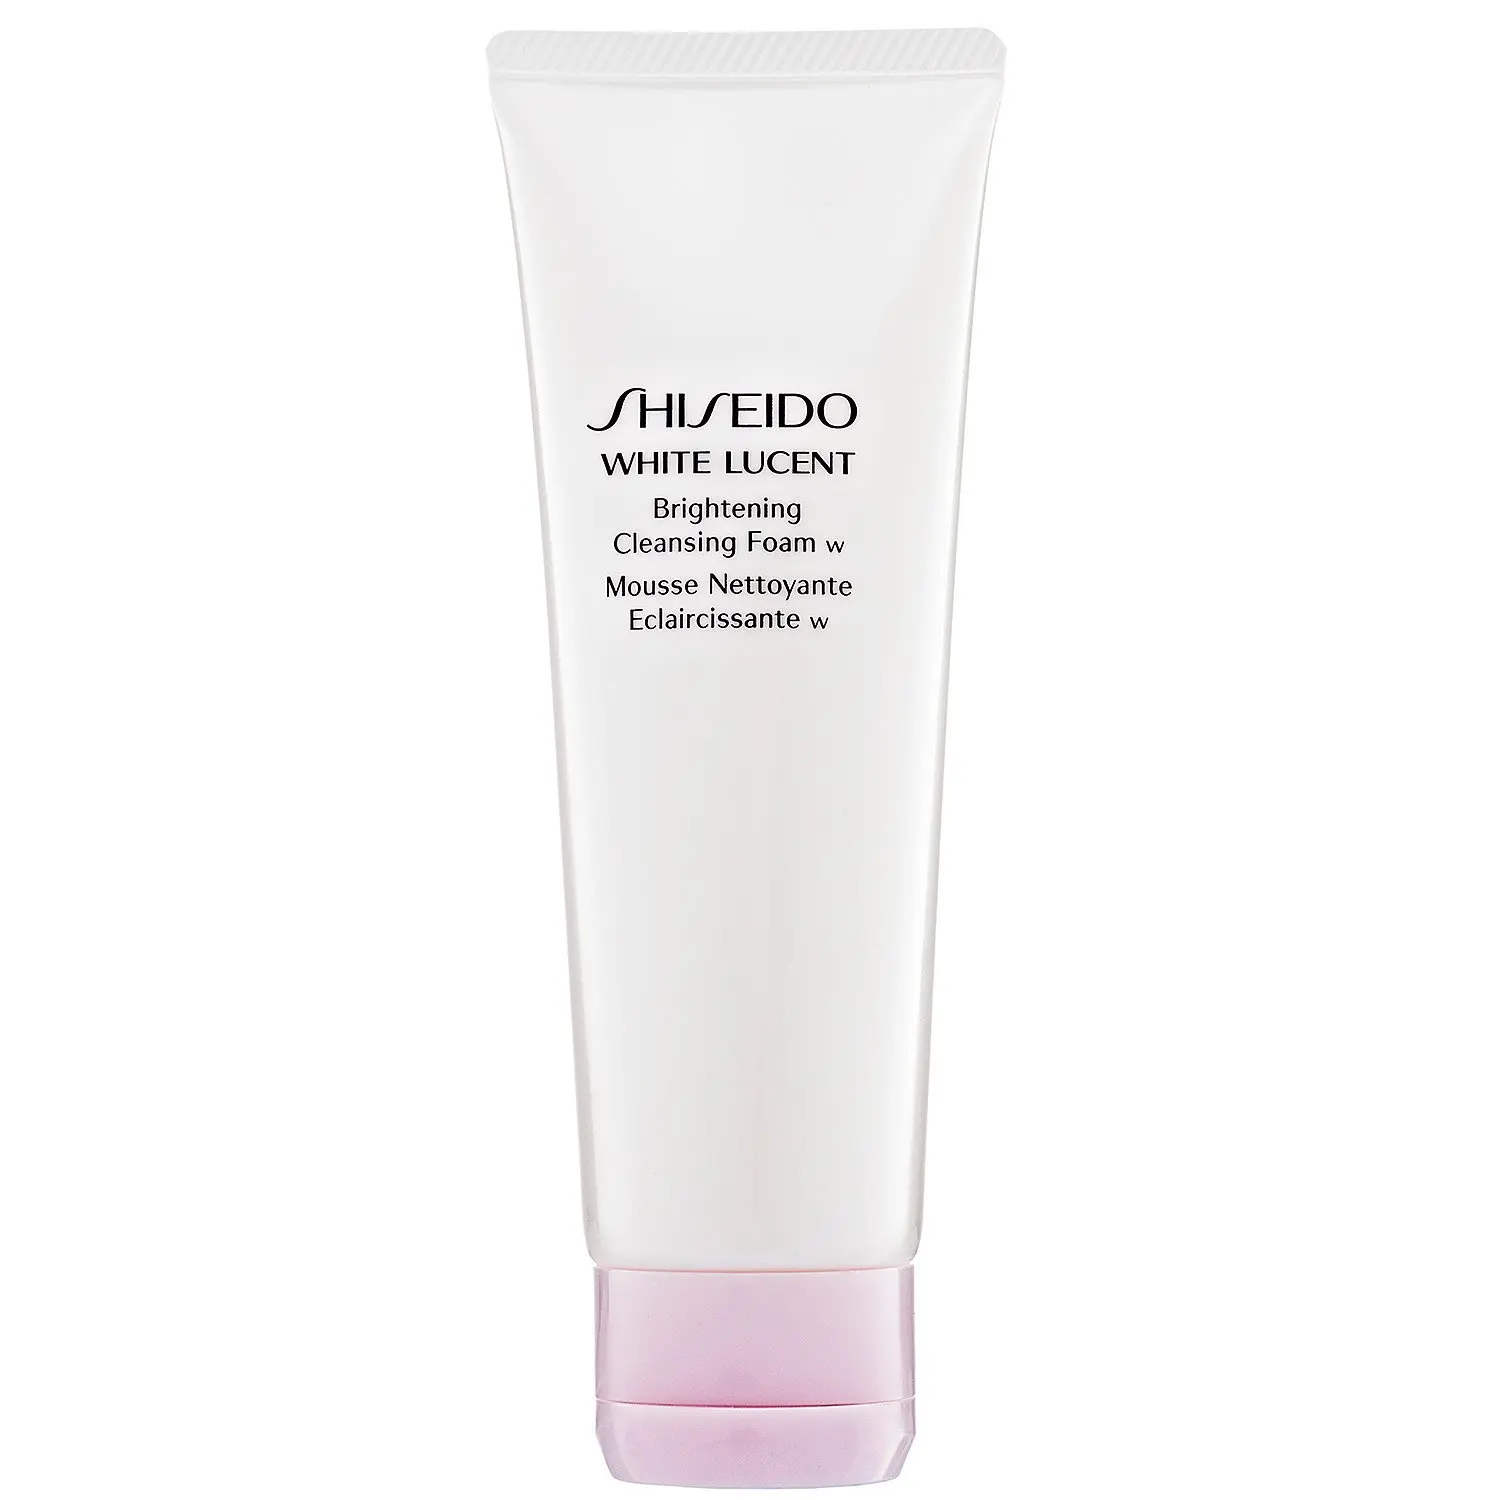 Brightening cleanser. Шисейдо White Lucent. Shiseido Cleansing Foam. Whitening умывалка. Brightening Cleansing Gel Sealux.